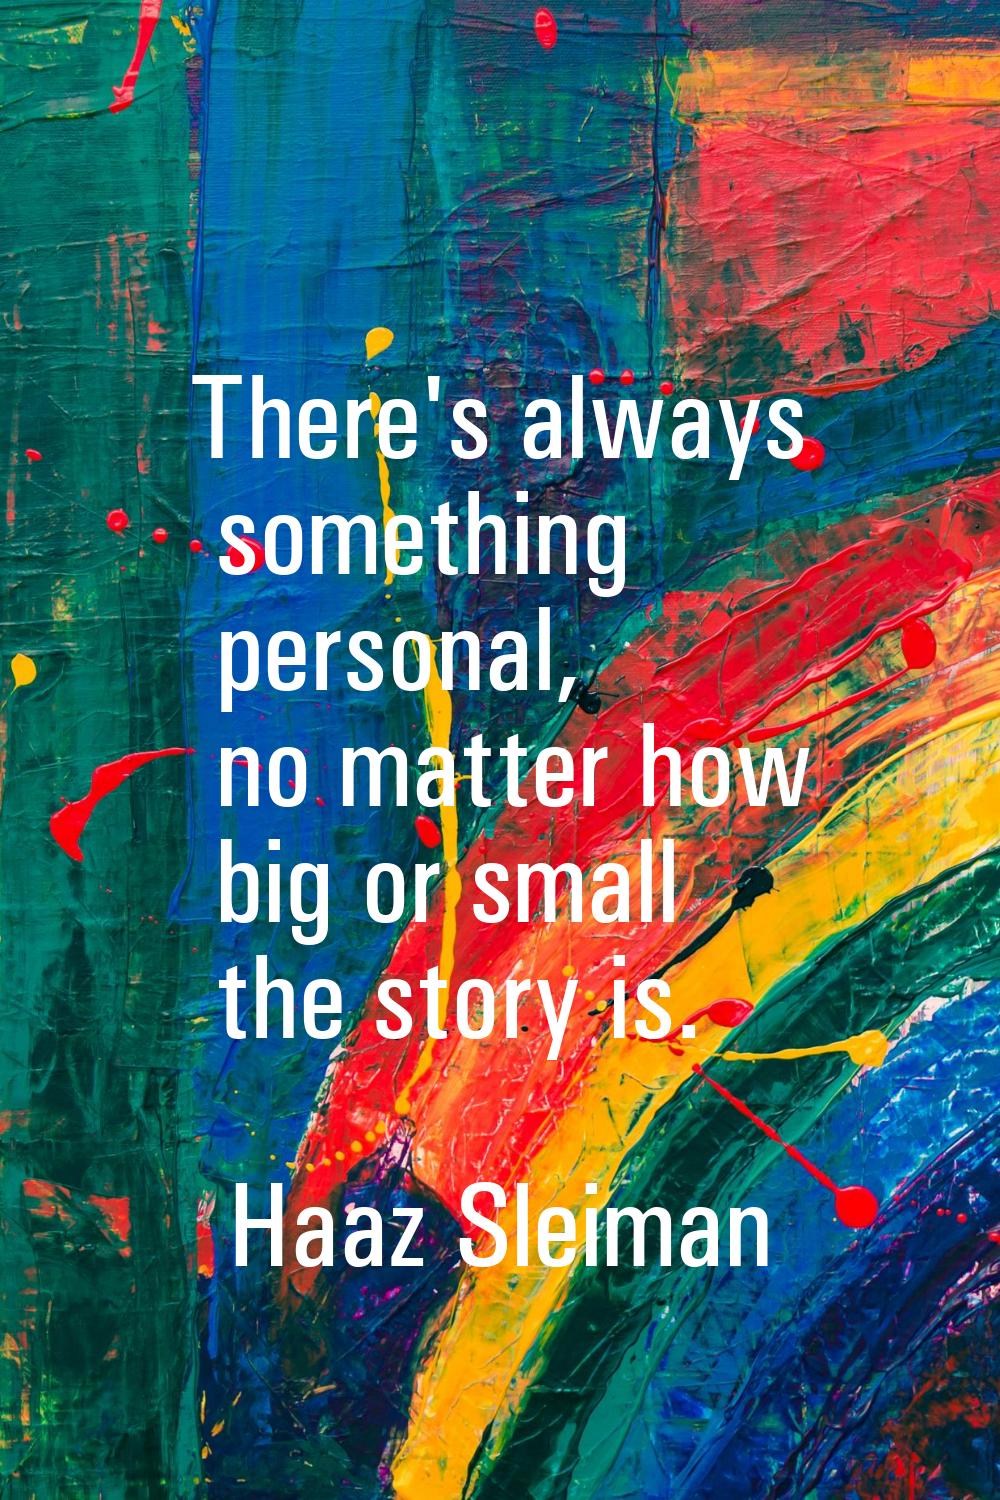 There's always something personal, no matter how big or small the story is.